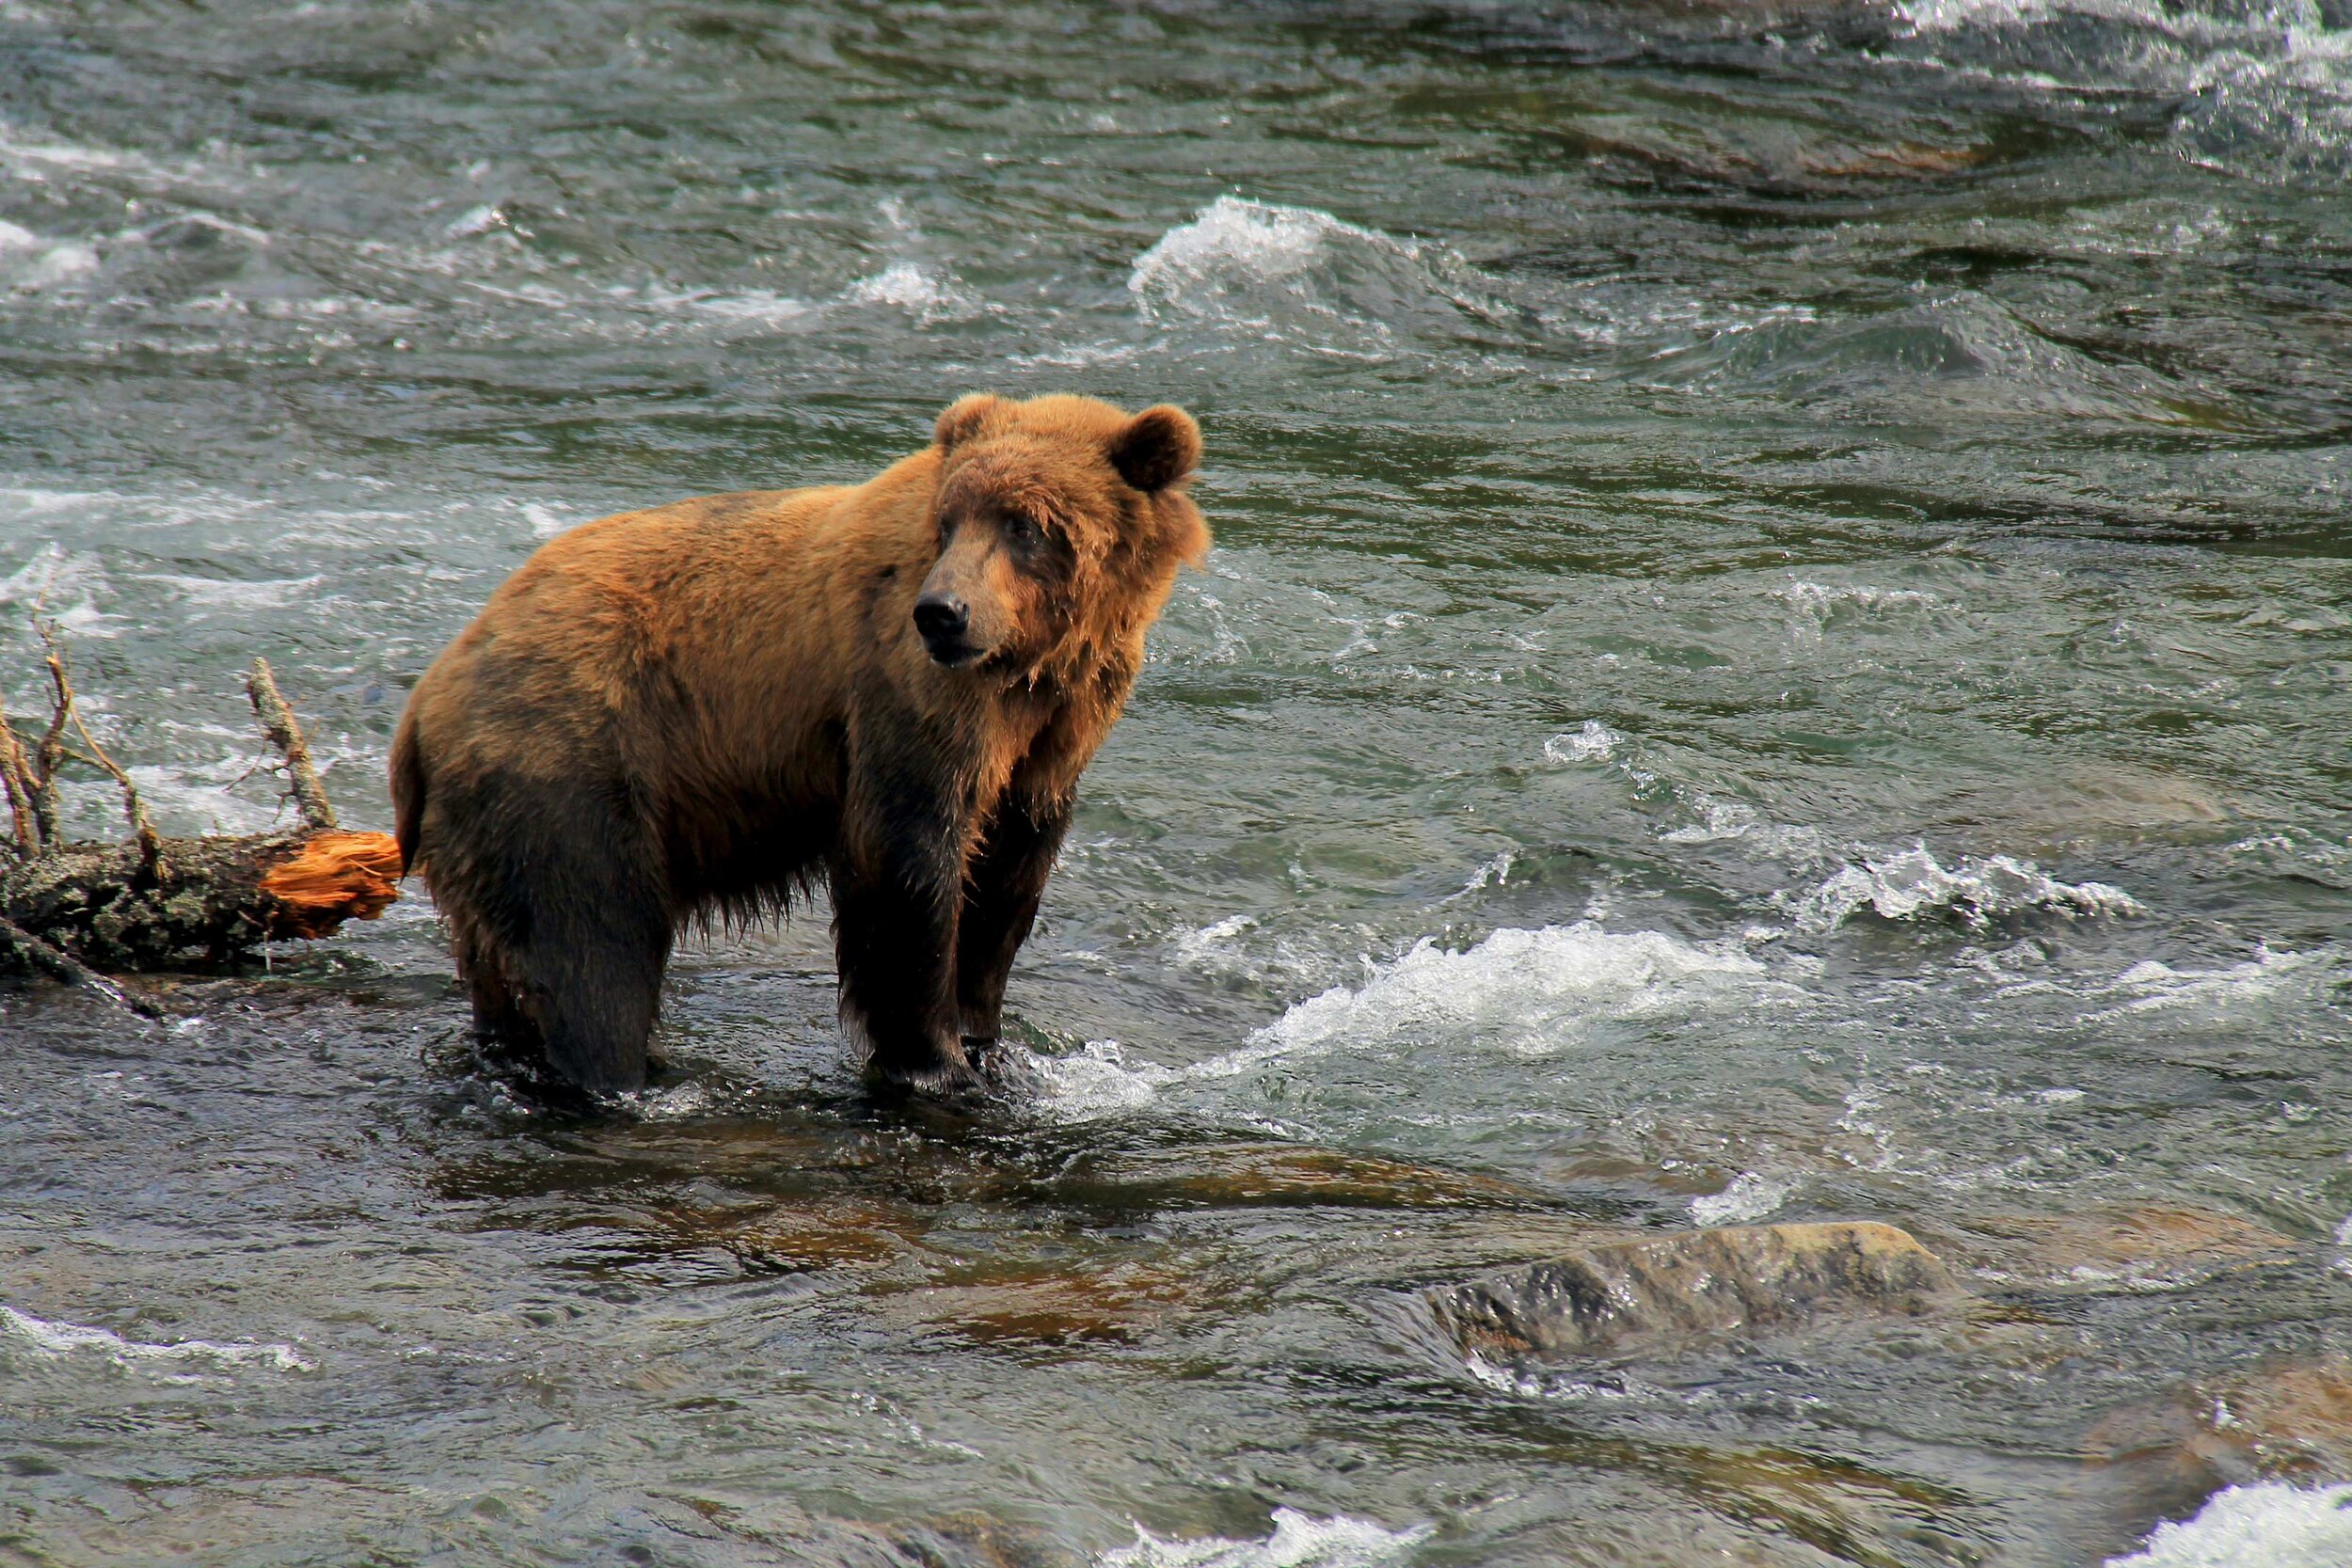  A brown bear standing on a rock in Brooks River.  